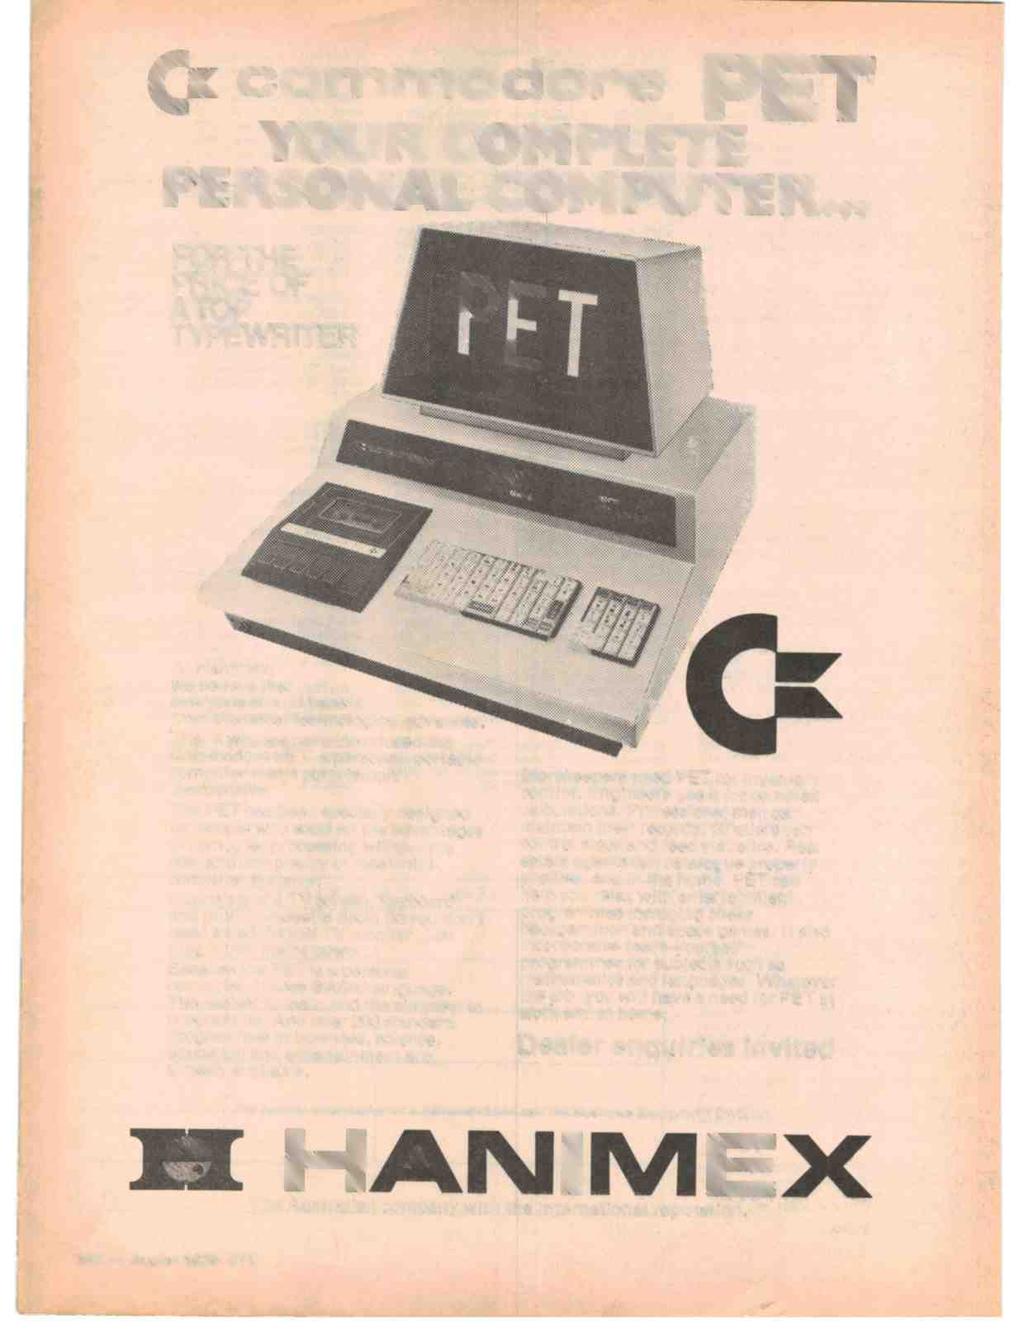 ;.i commodore PET YOUR COMPLETE -RSONAL CON PUTE R... FOR THE PRICE OF ATOP TYPEWRITER aey. " "-. F 4'.